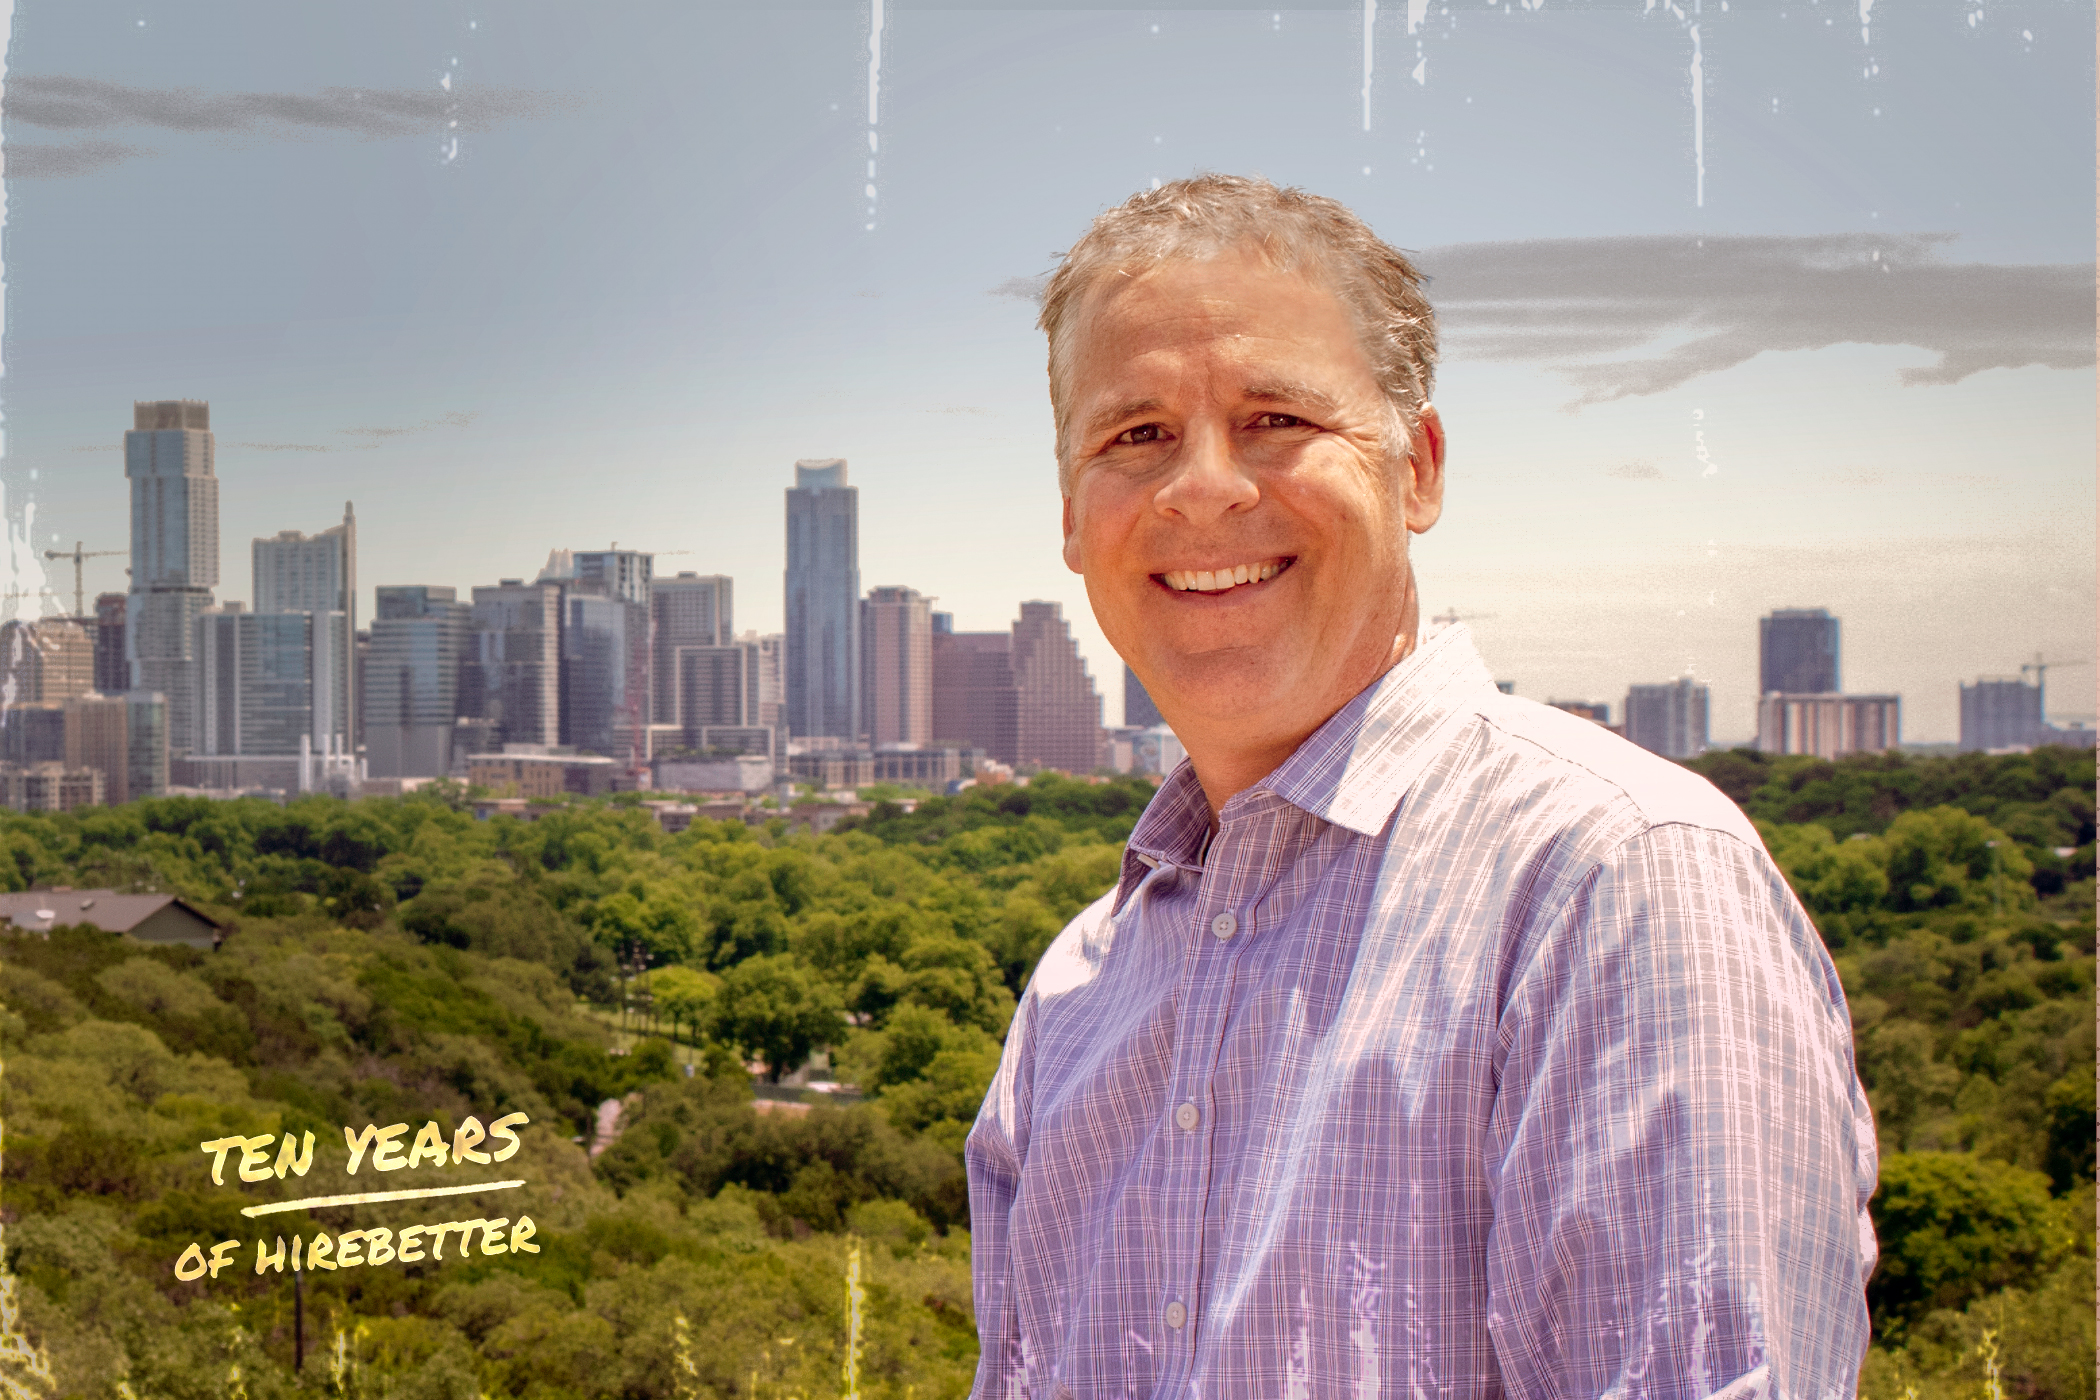 Kurt Wilkin, Co-Founder of HireBetter, stands in front of the Austin Skyline